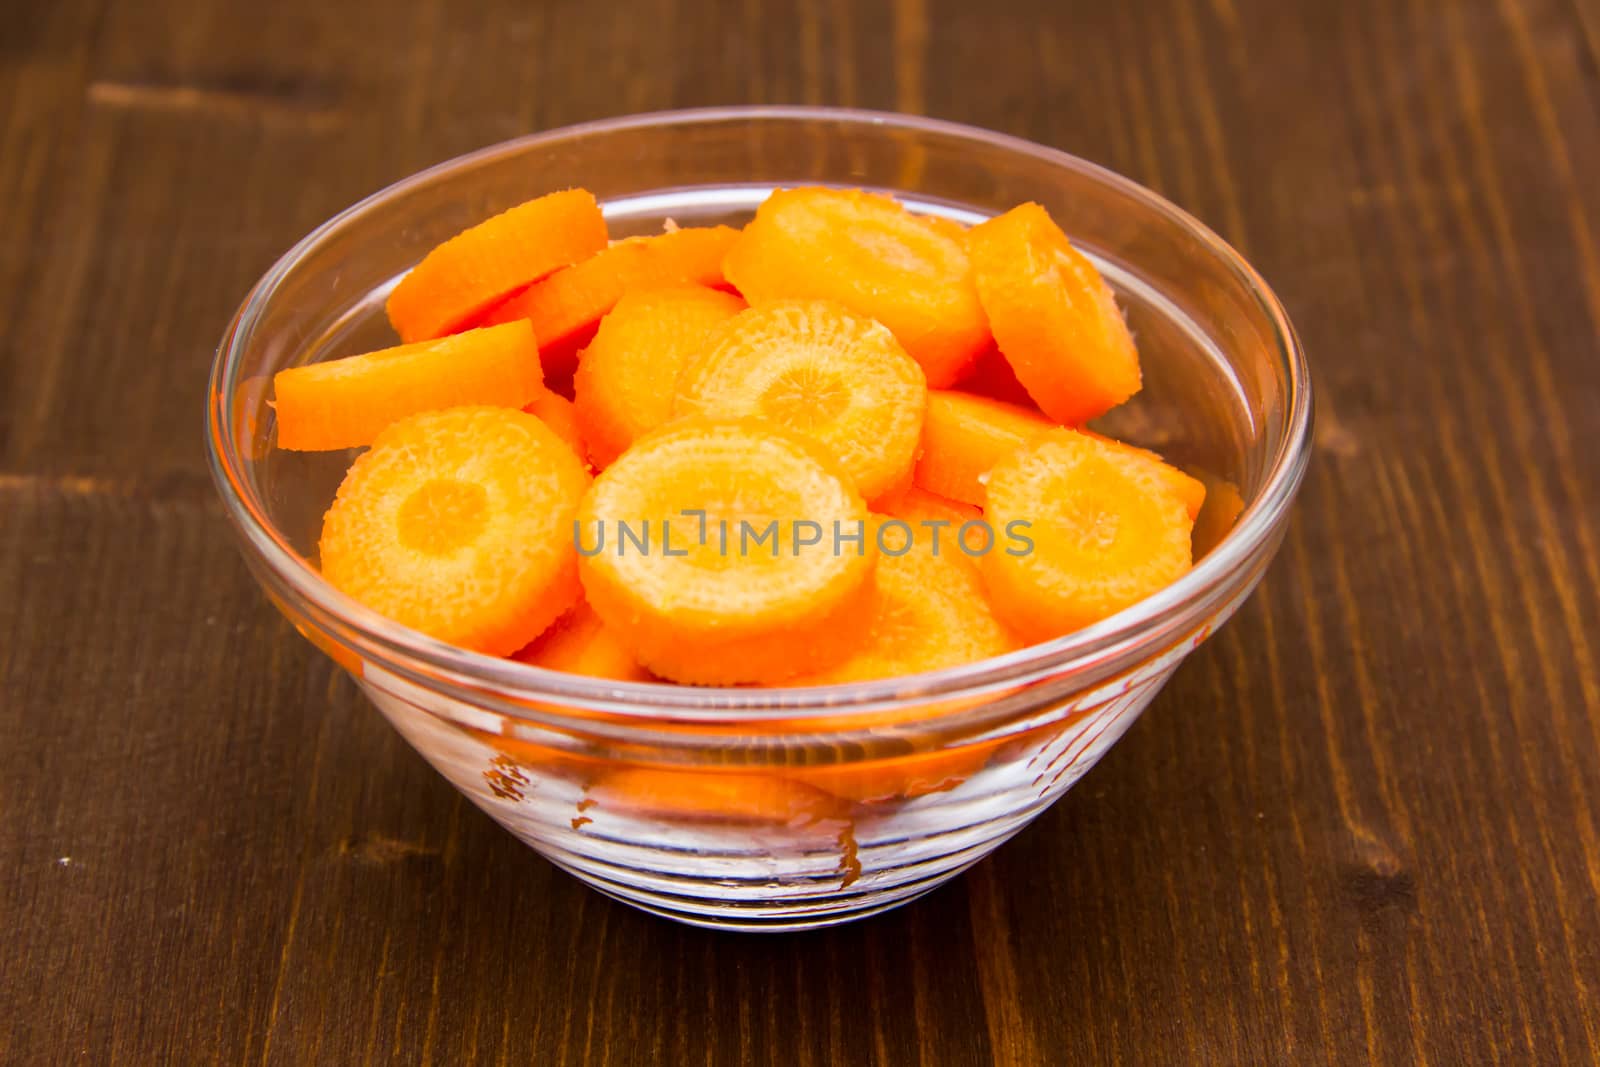 Carrot slices on bowl on wooden table